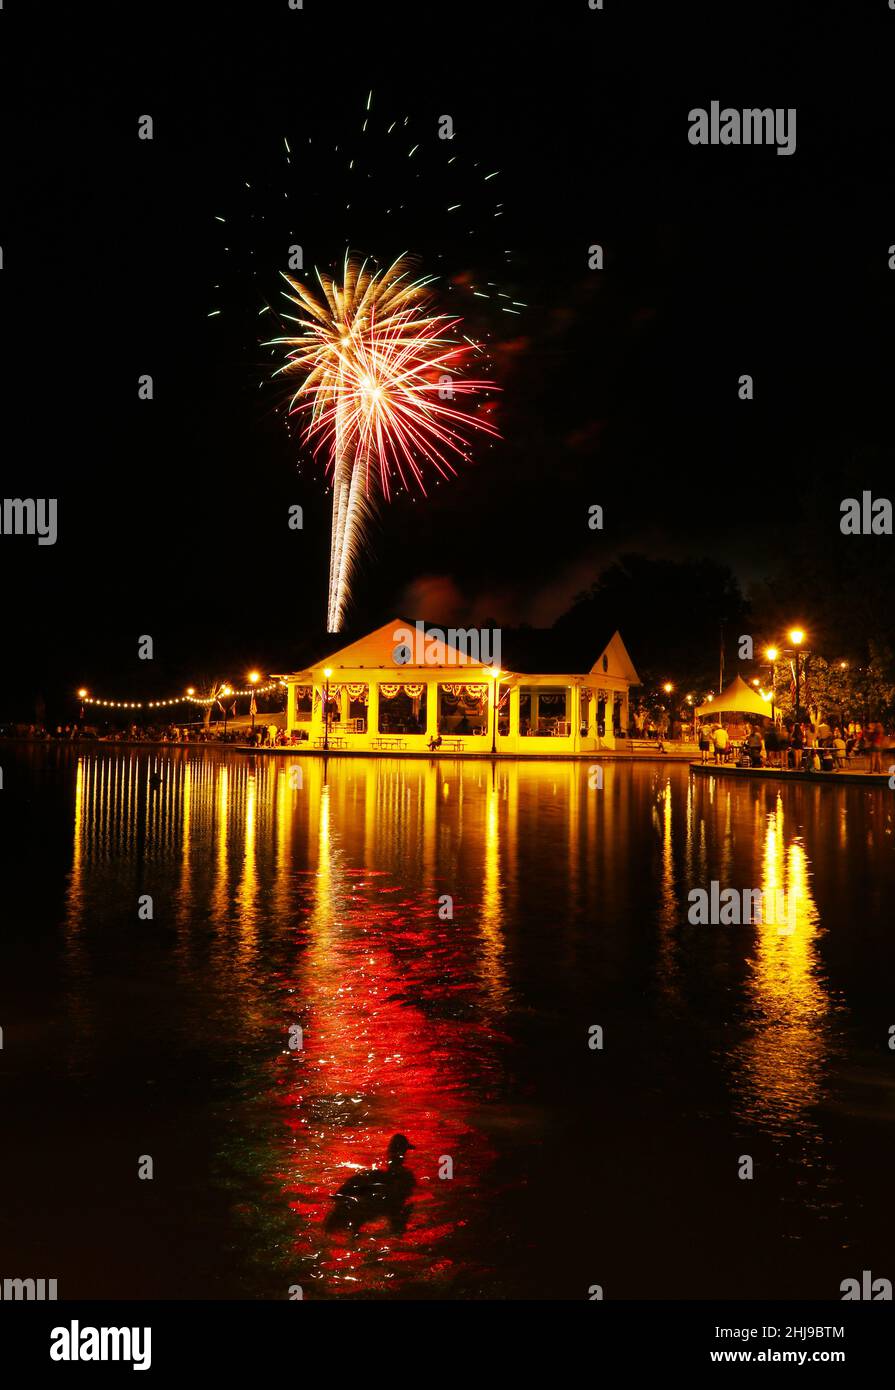 Fireworks over Shawnee Park pavilion. July 4th, Independence Day, celebration. A duck swims in the foreground. Shawnee Park, Xenia, Dayton, Ohio, USA. Stock Photo